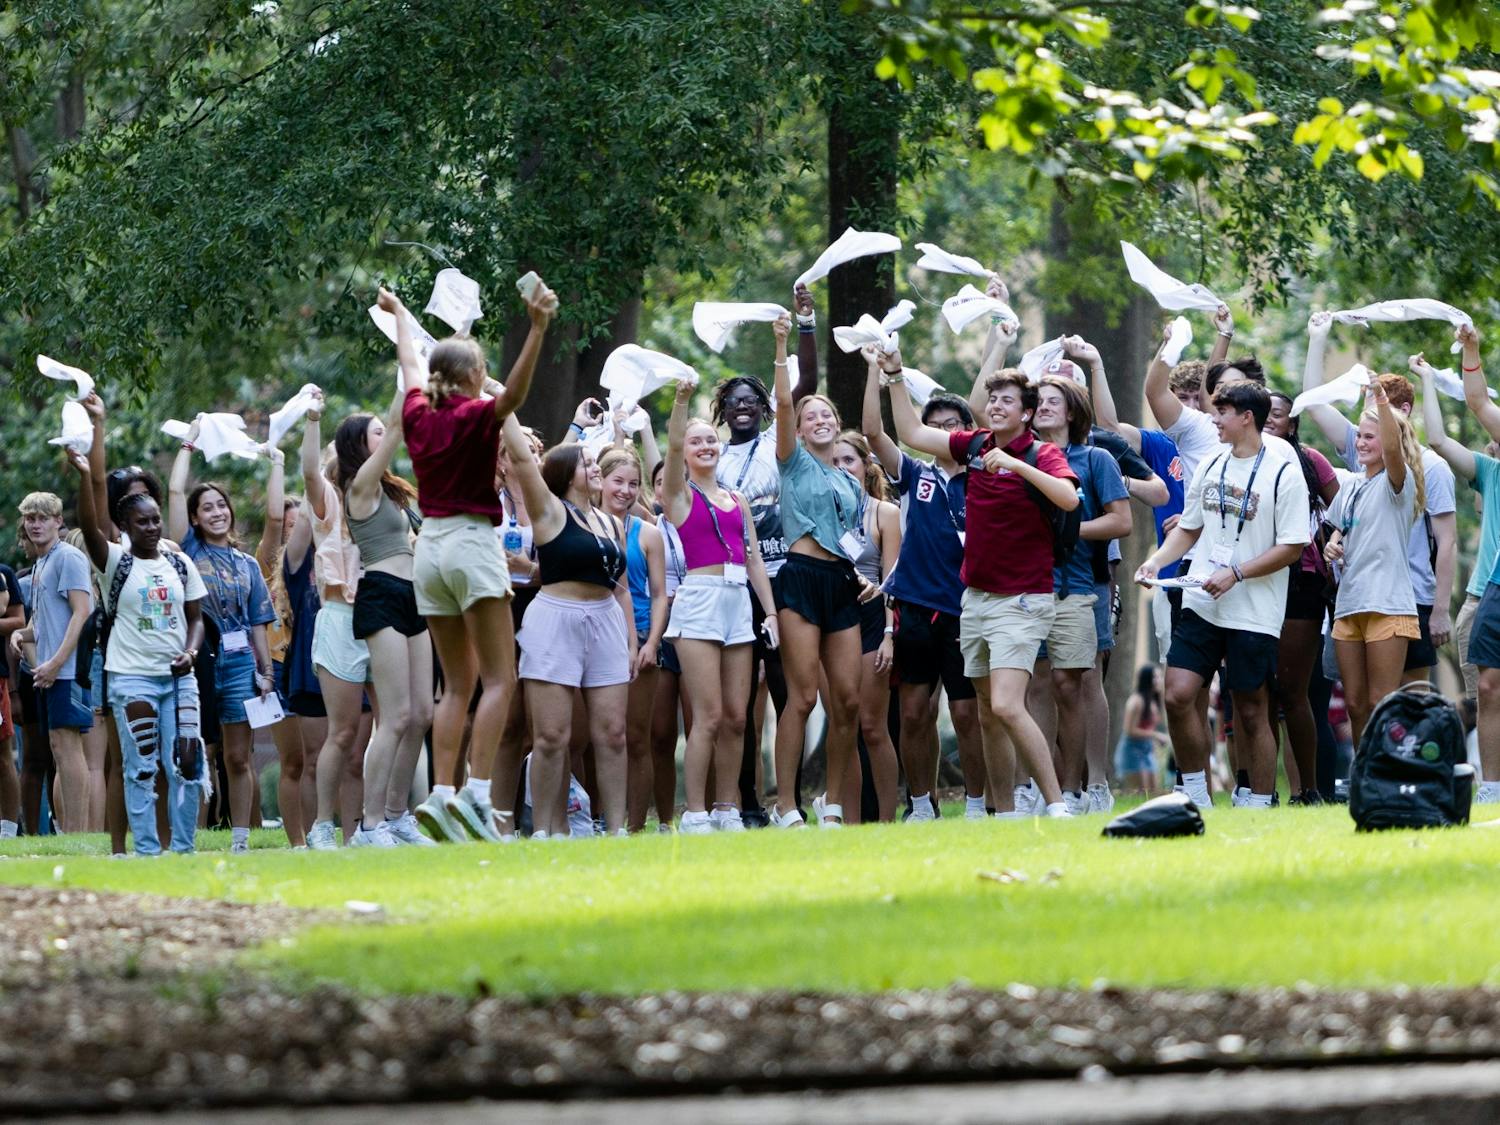 A group of first-year students practice sandstorm during an orientation session on July 20, 2022. Students listened to presentations, toured campus and played games during sessions held throughout the summer.